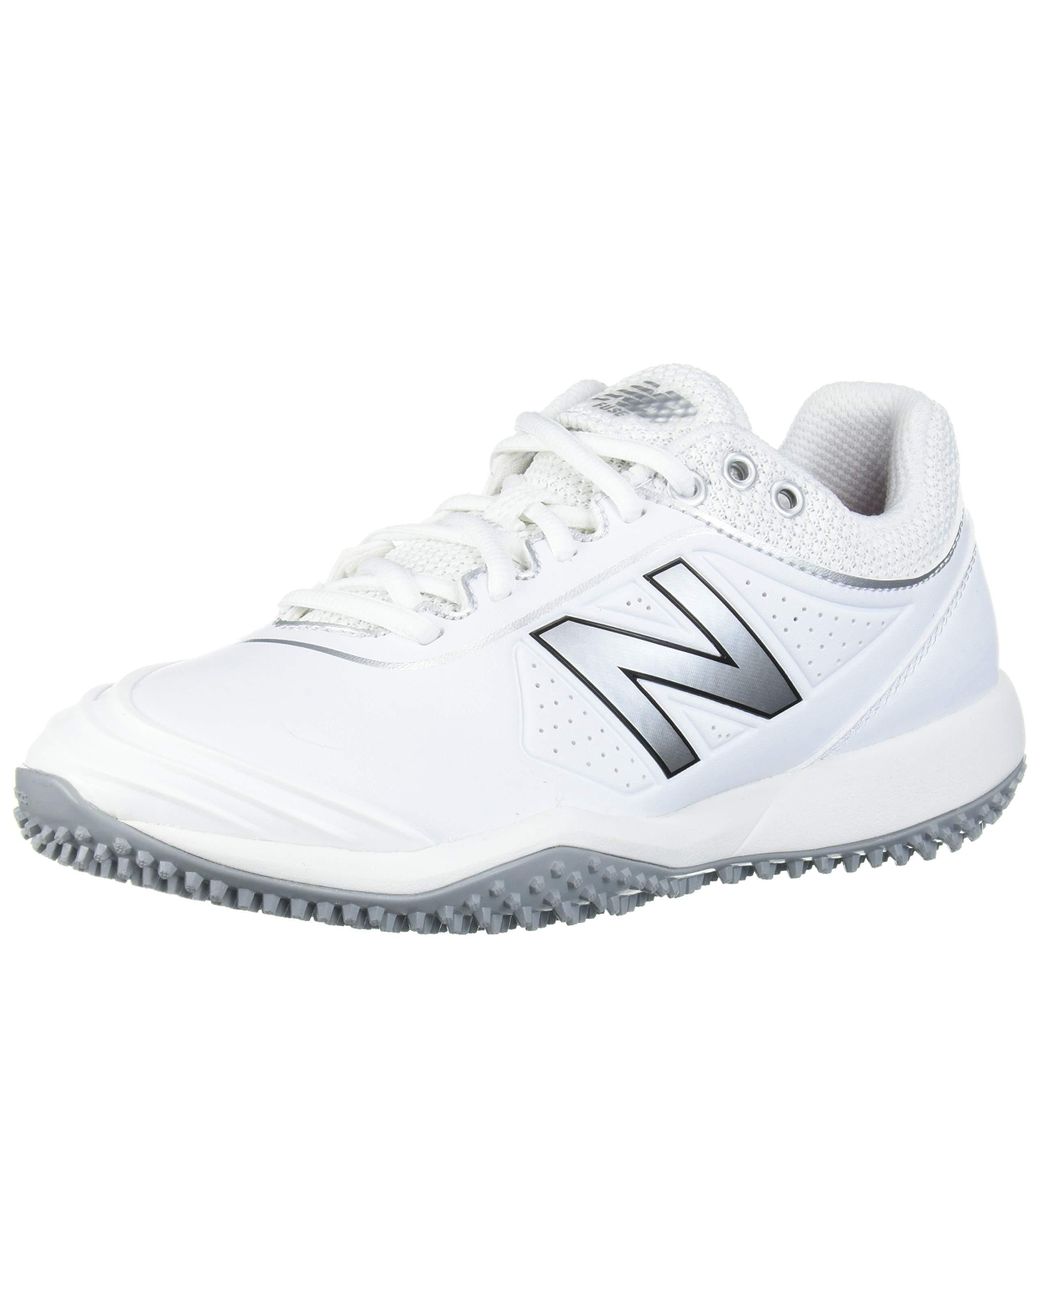 New Balance Synthetic Fuse V2 Turf Softball Shoe in White/Silver (White ...